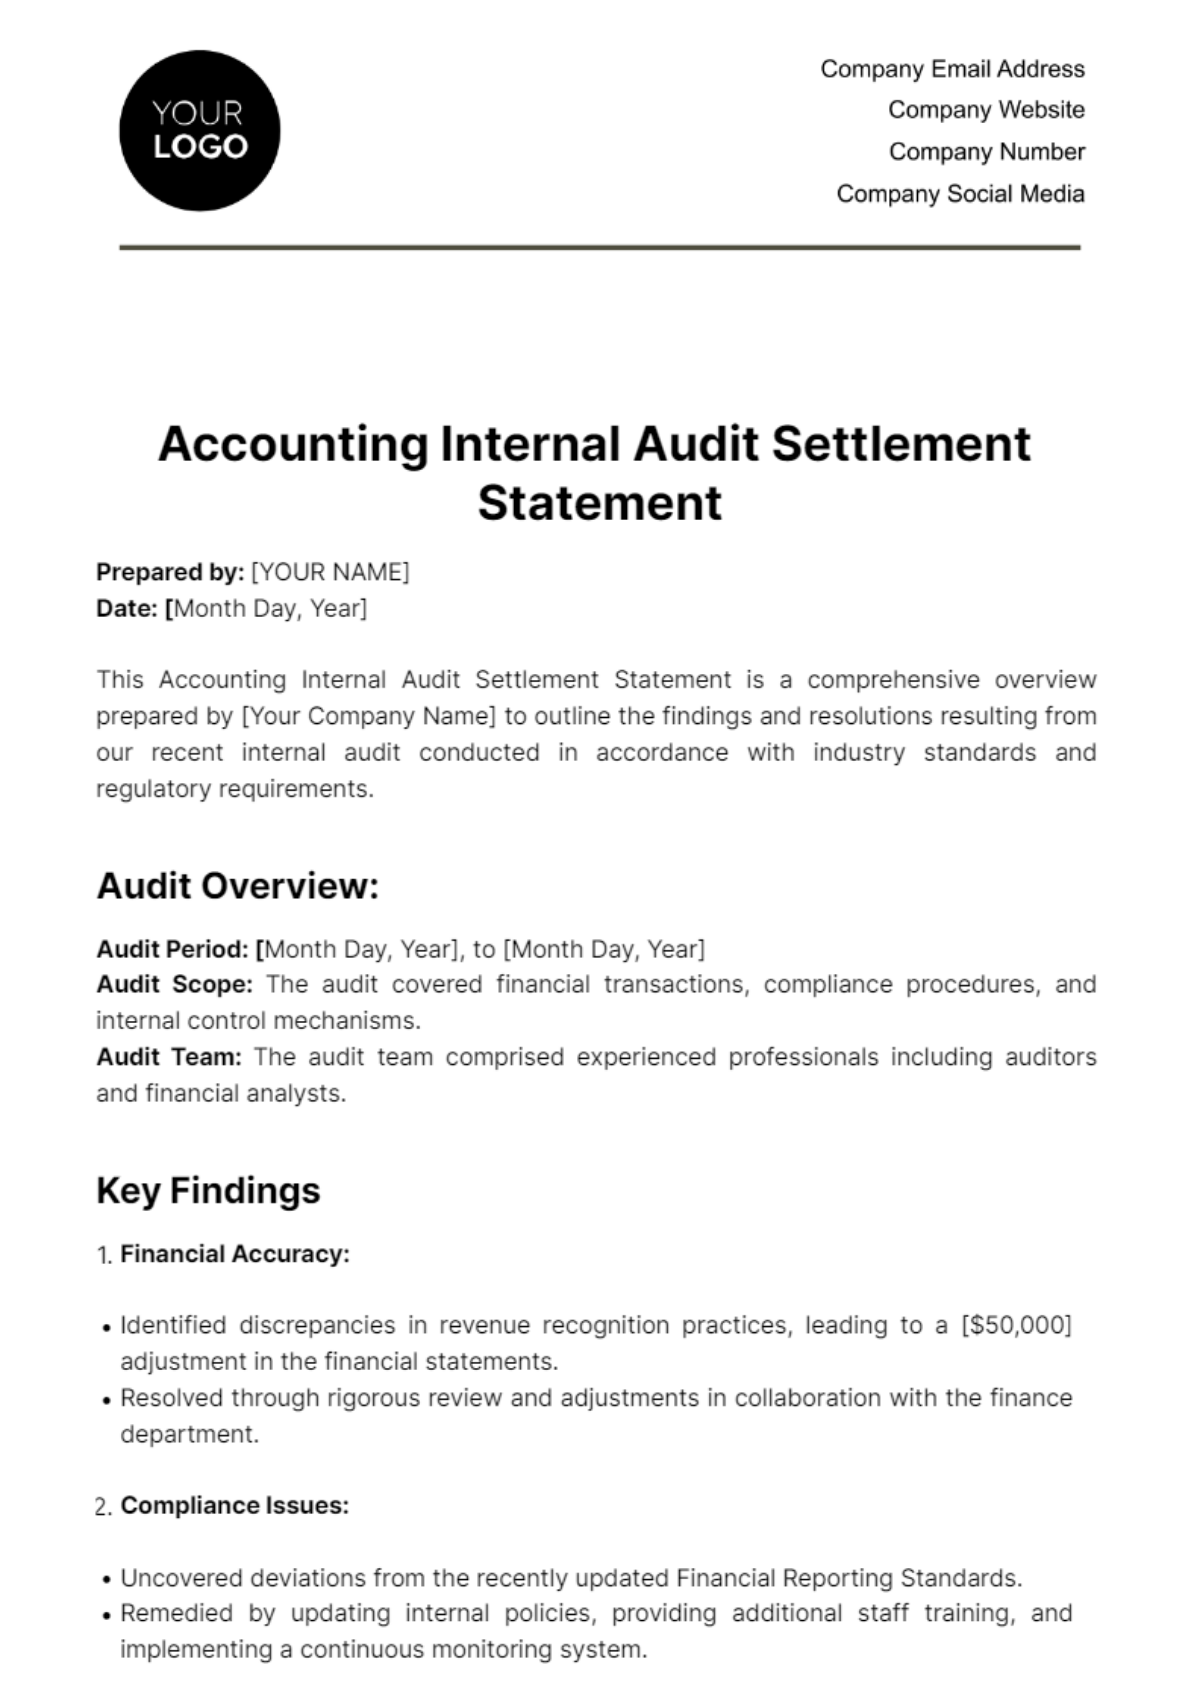 Free Accounting Internal Audit Settlement Statement Template